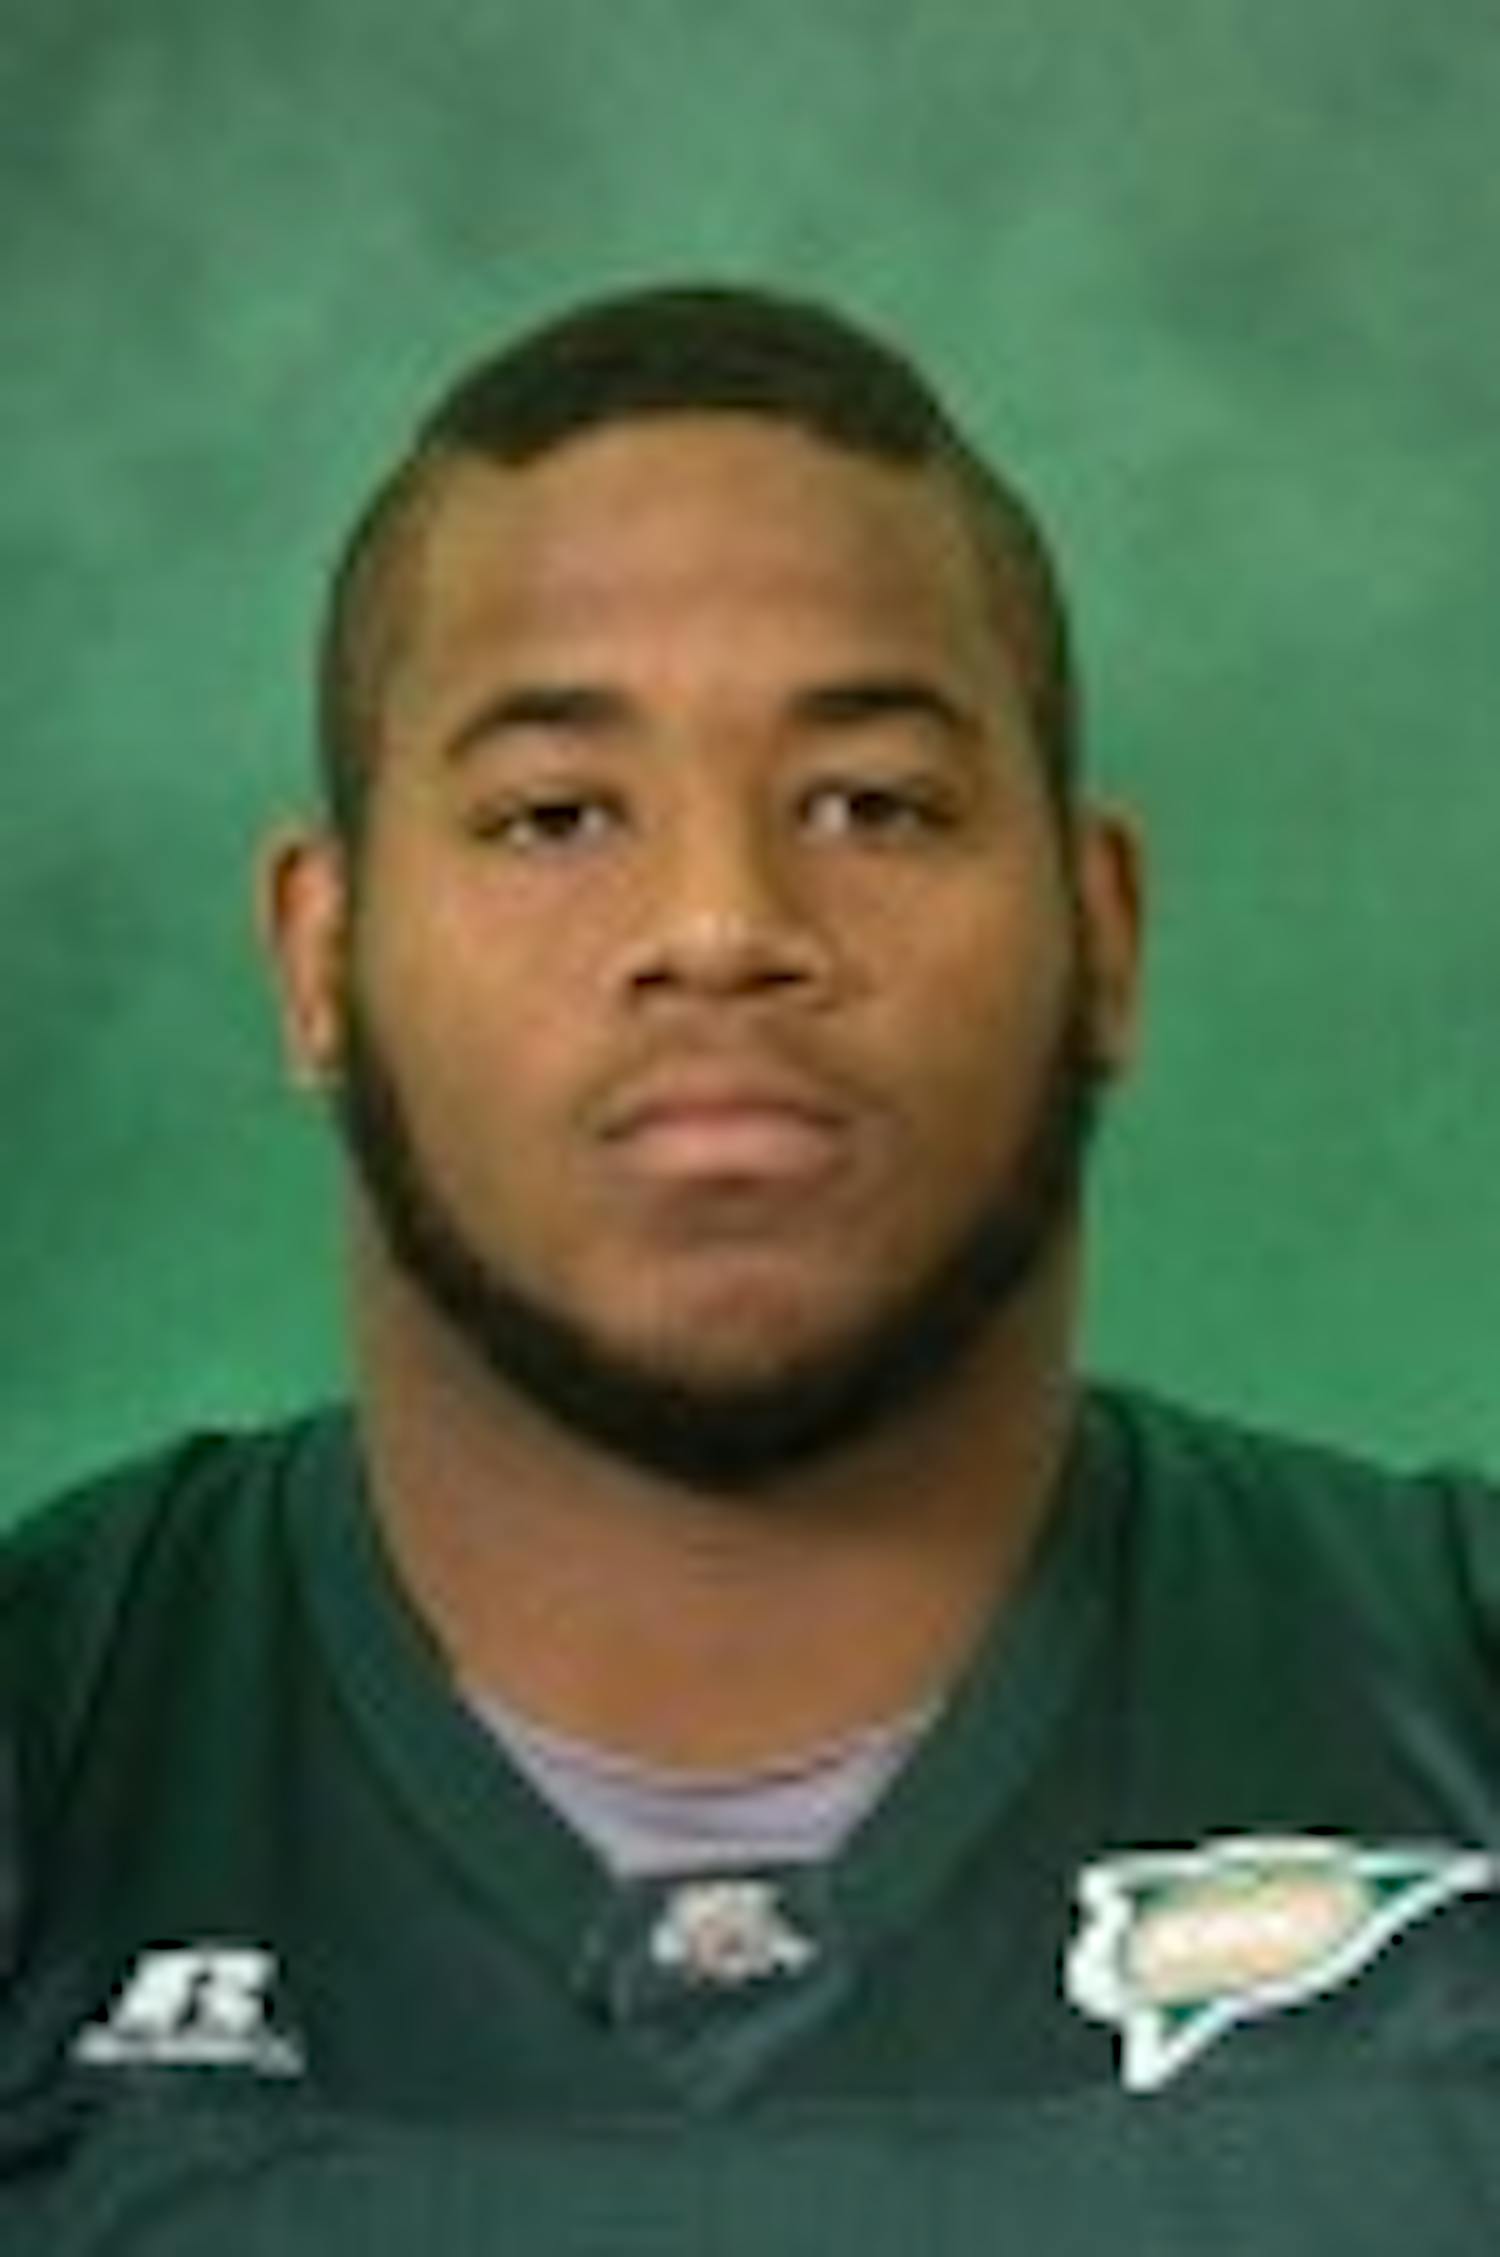 Former Ohio athlete dies from blood clot, dad says  